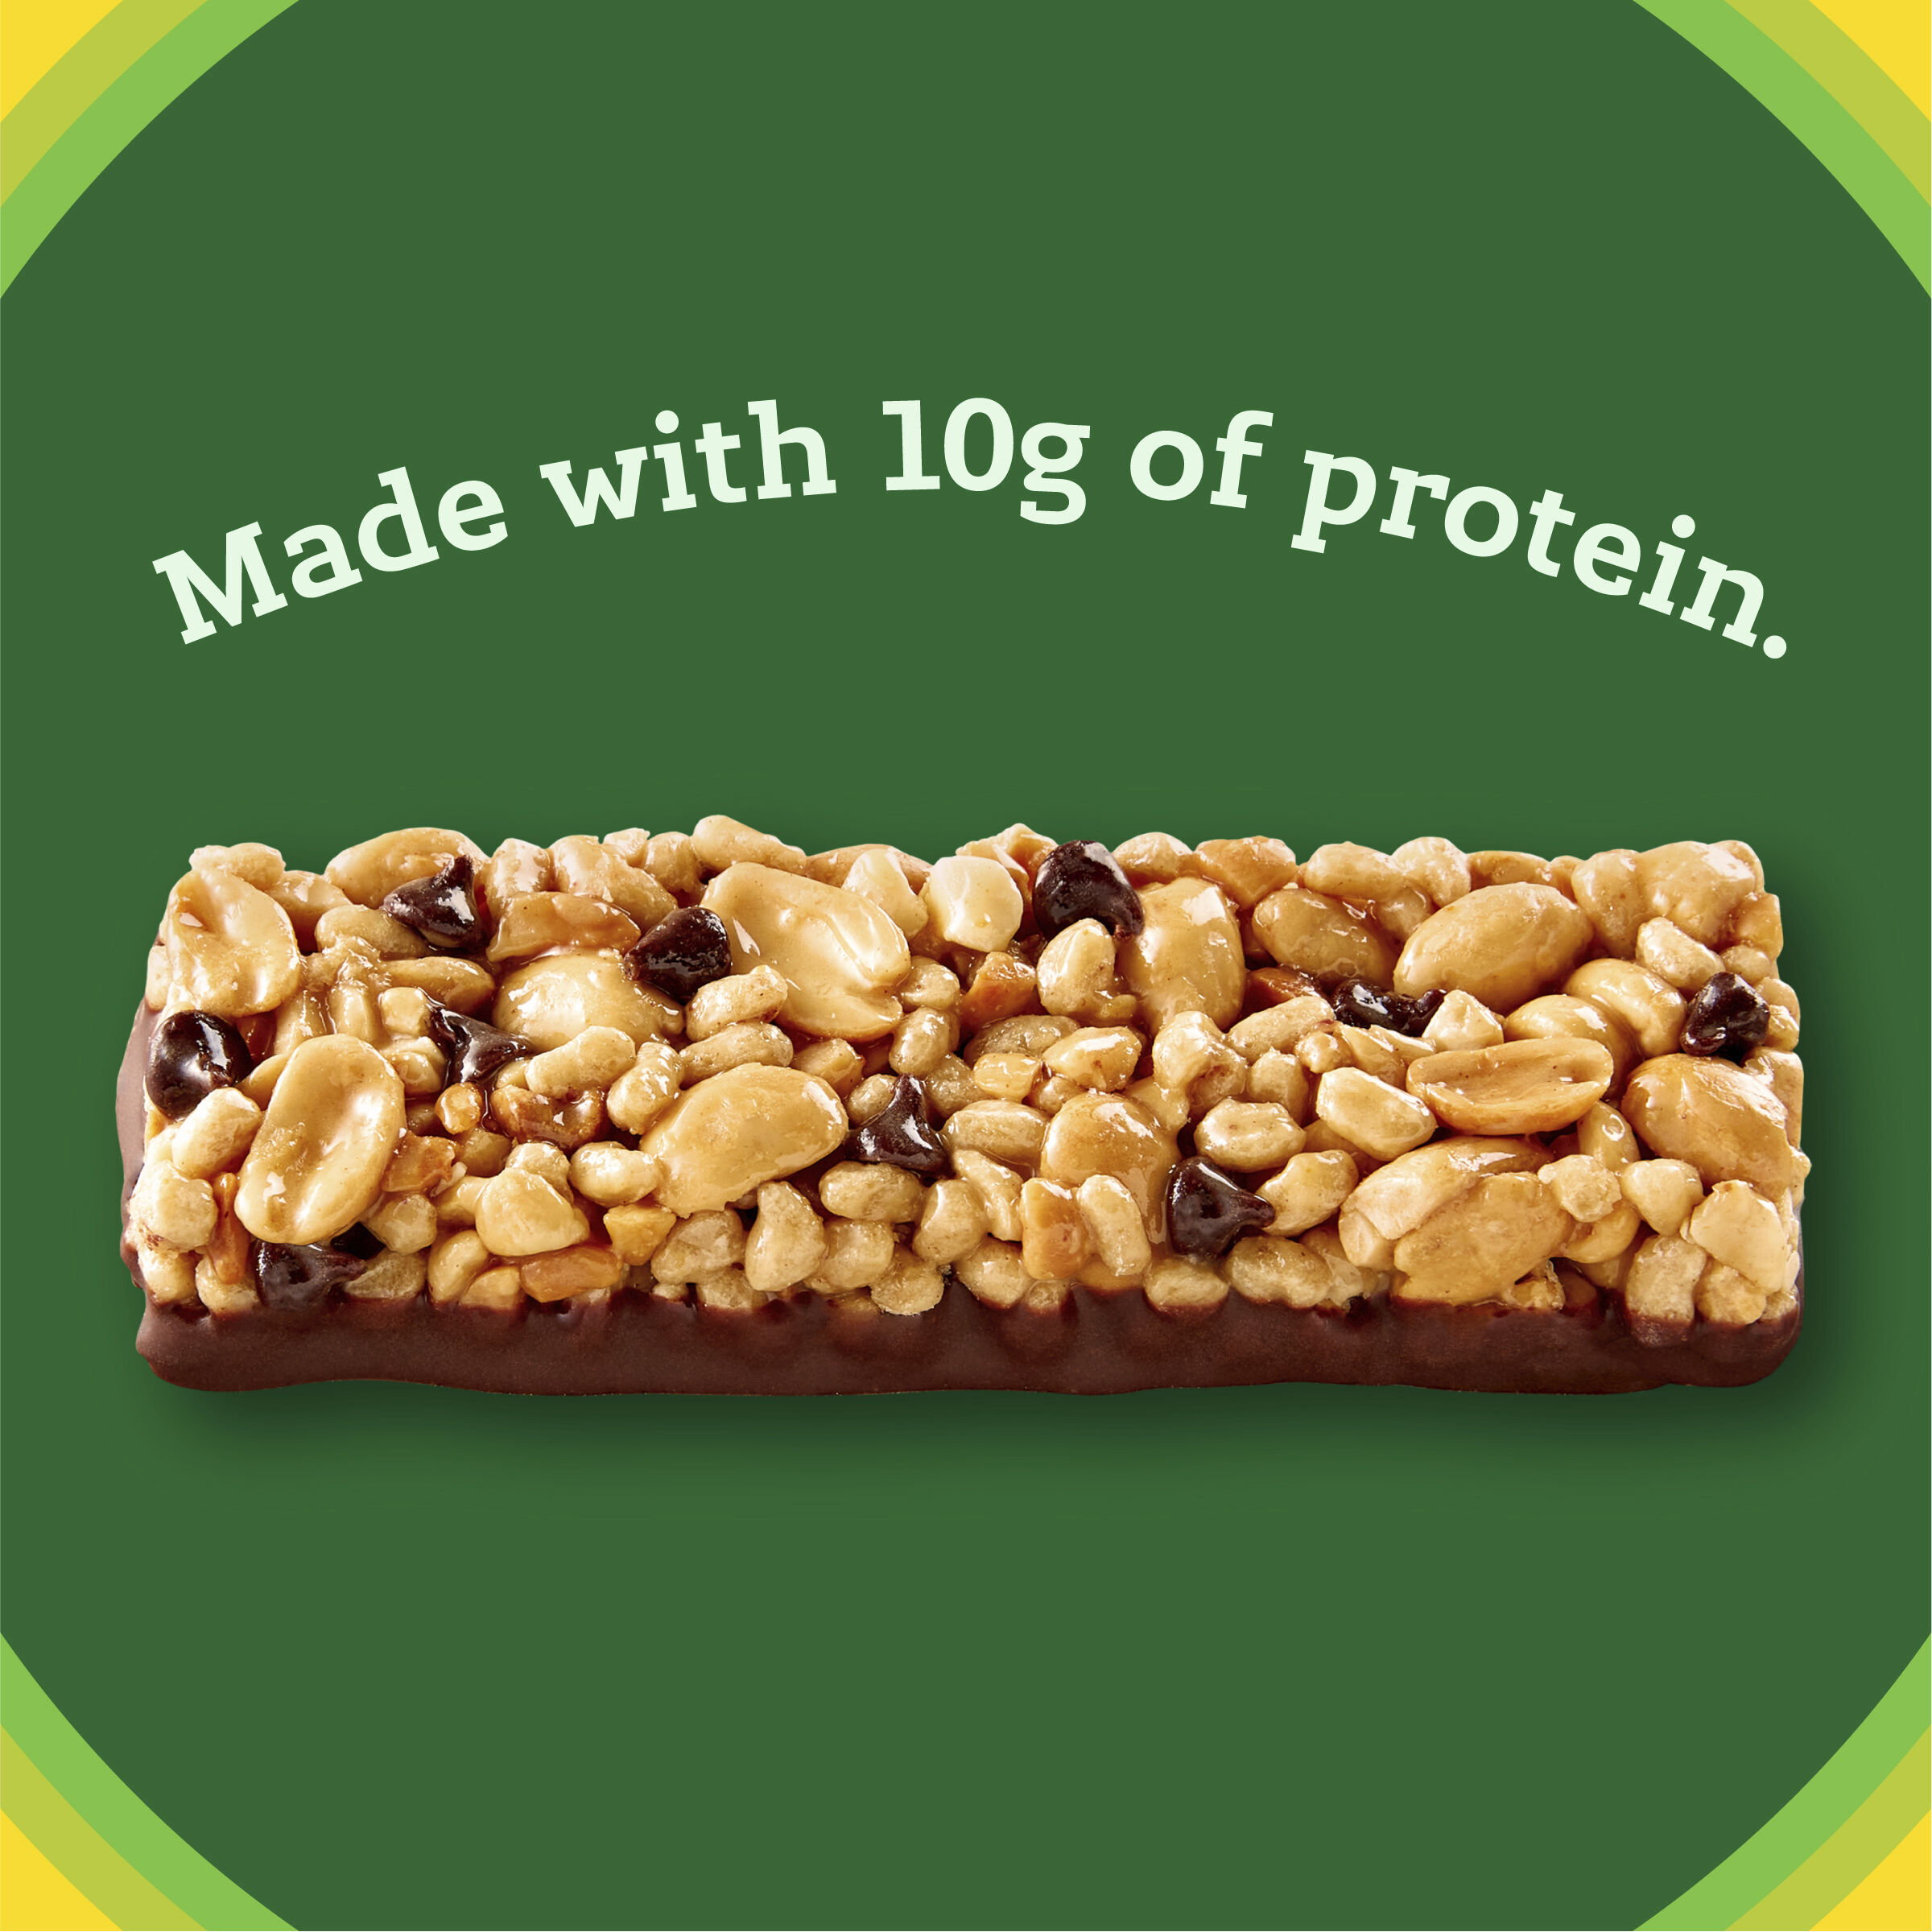 Nature Valley Chewy Protein Granola Bars, Peanut Butter Dark Chocolate, 10 Bars, 14.2 OZ - image 2 of 9